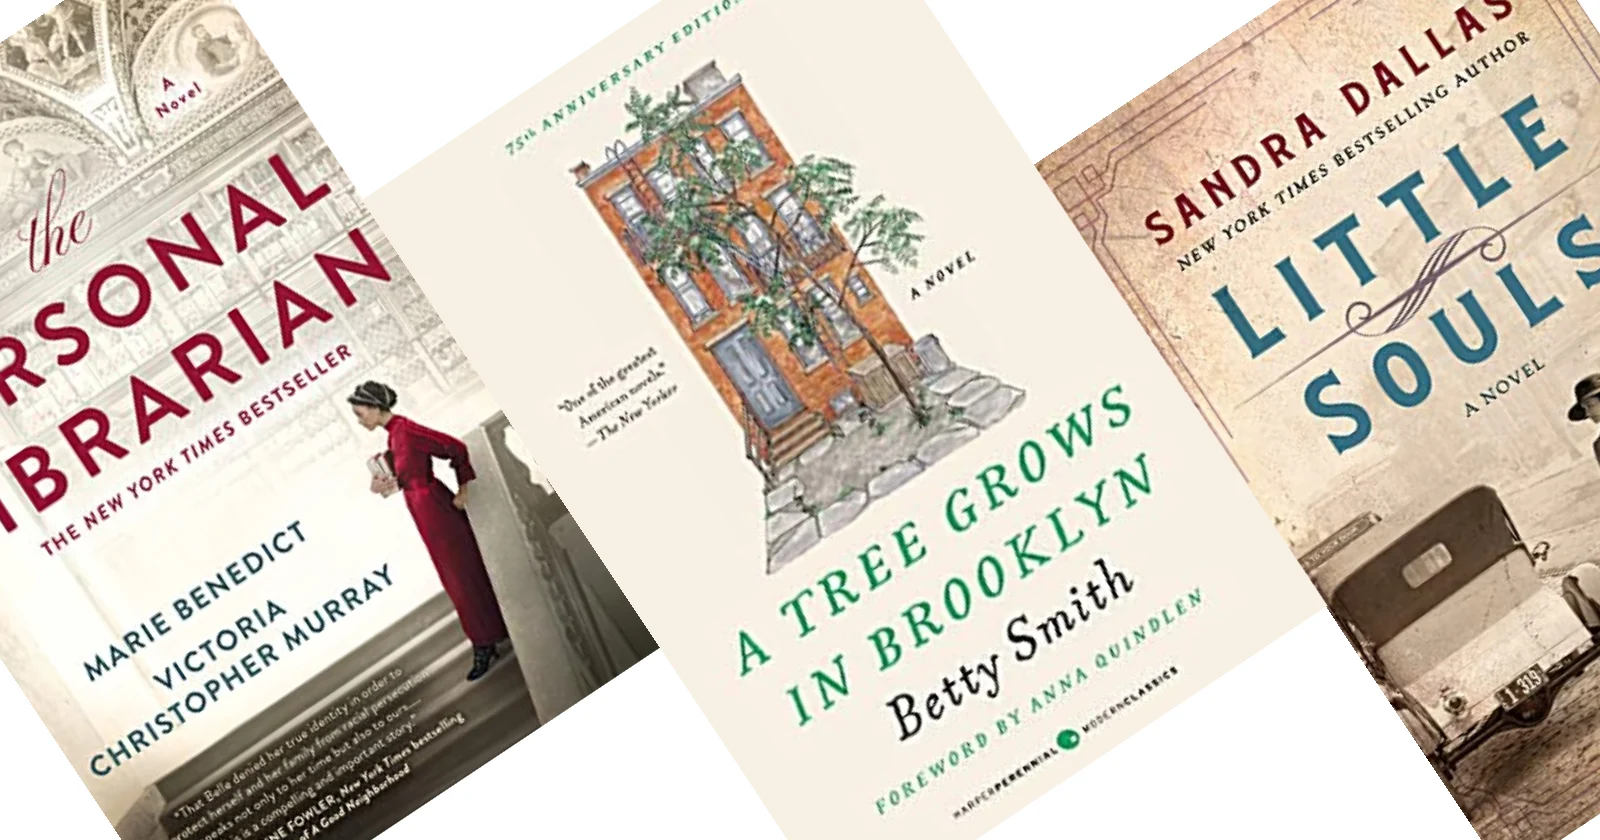 3 tilted book covers with A Tree Grows in Brooklyn in the center